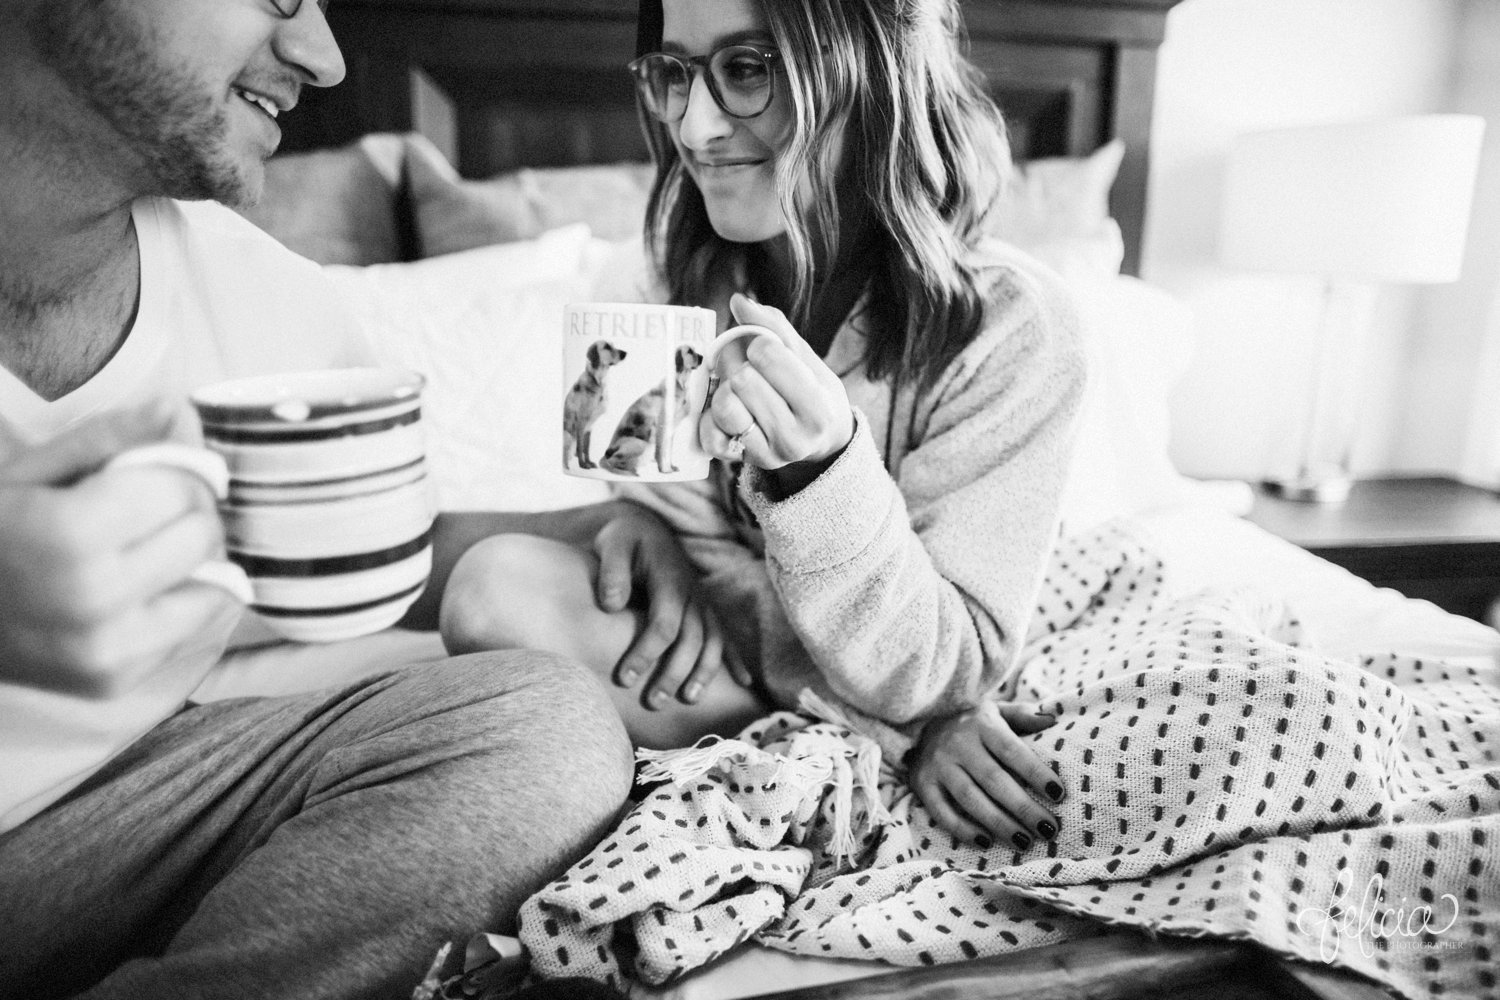 images by feliciathephotographer.com | destination photographer | engagement session | in home | lifestyle | kansas city | cozy | bed | snuggles | golden retriever | casual | fuzzy socks | laughter | jammies | kiss | black and white | 